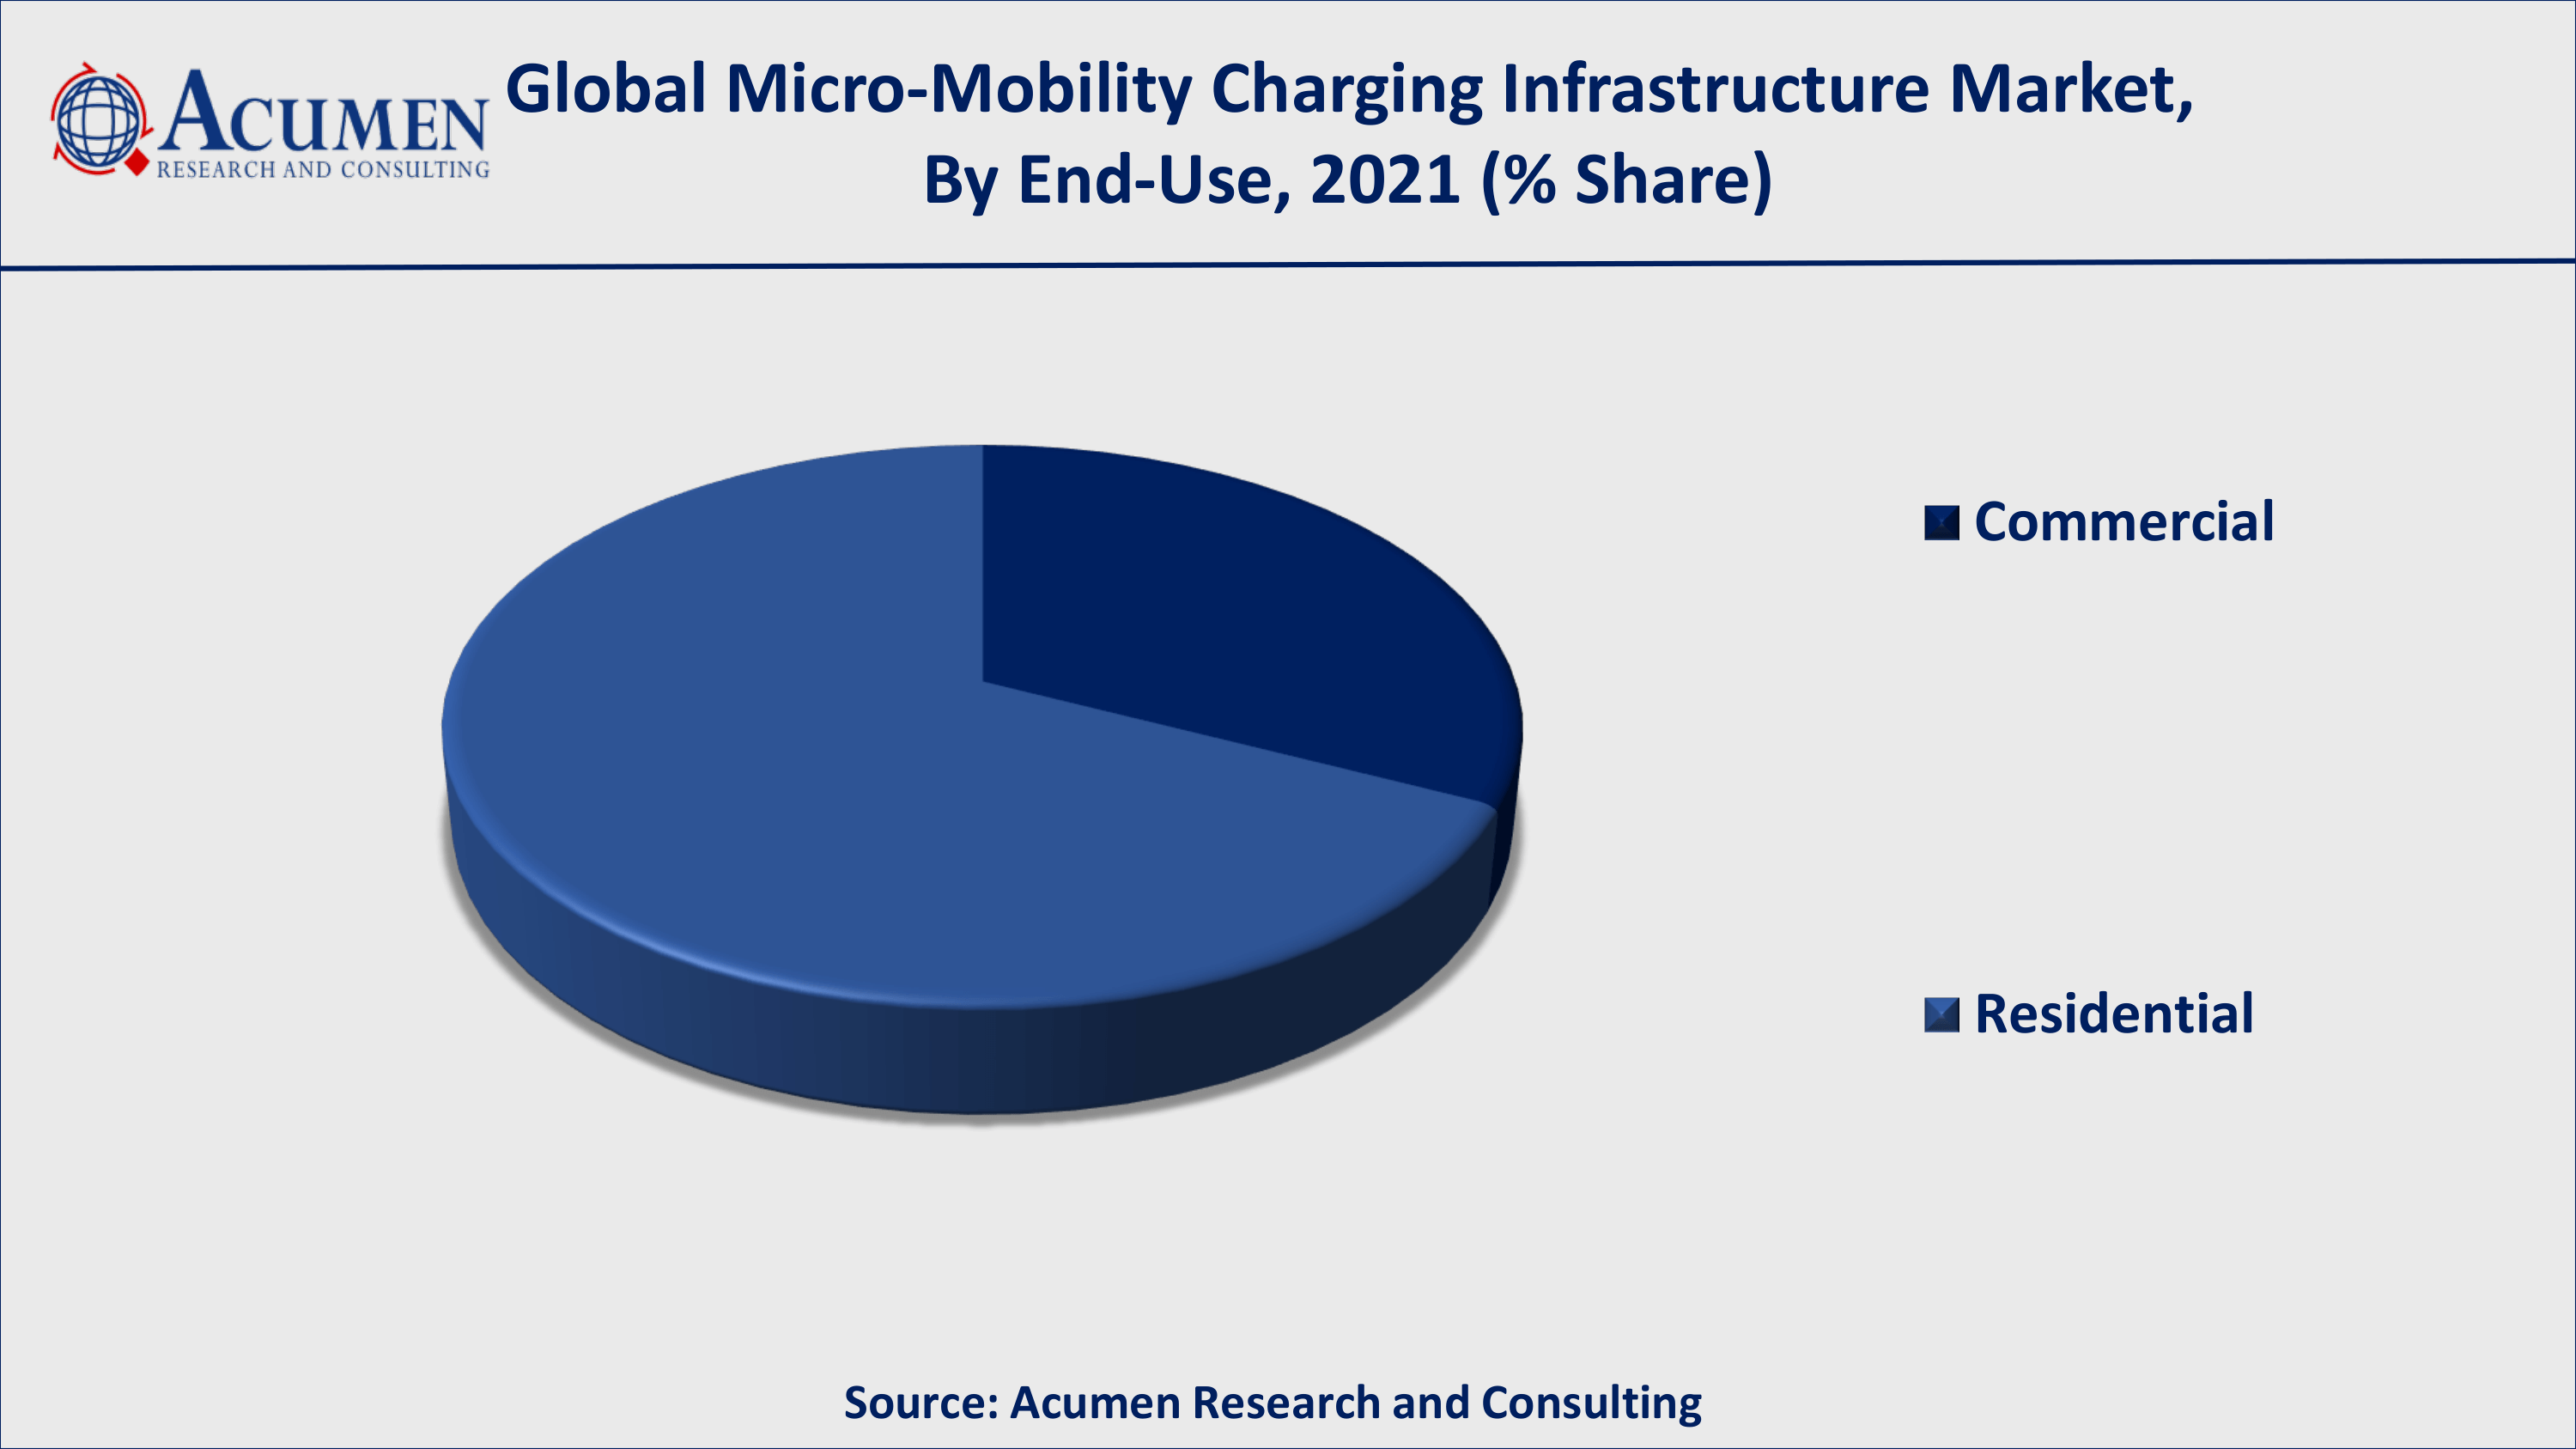 Growing investment in micro-mobility will fuel the global micro-mobility charging infrastructure market value